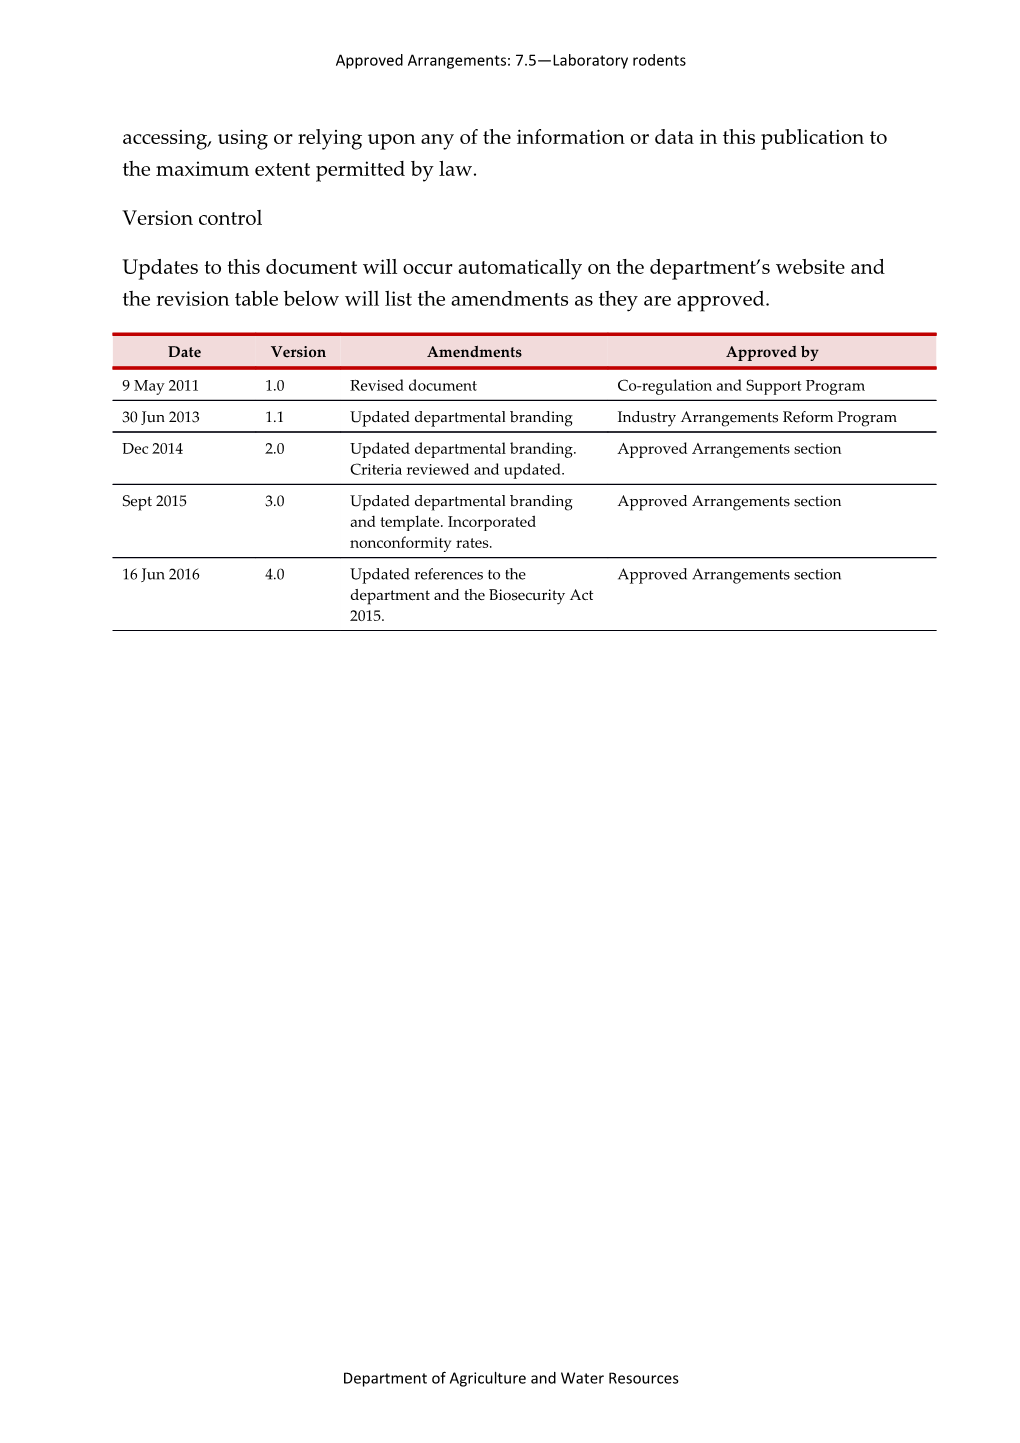 Approved Arrangements for 7.5 - Laboratory Rodents: Requirements